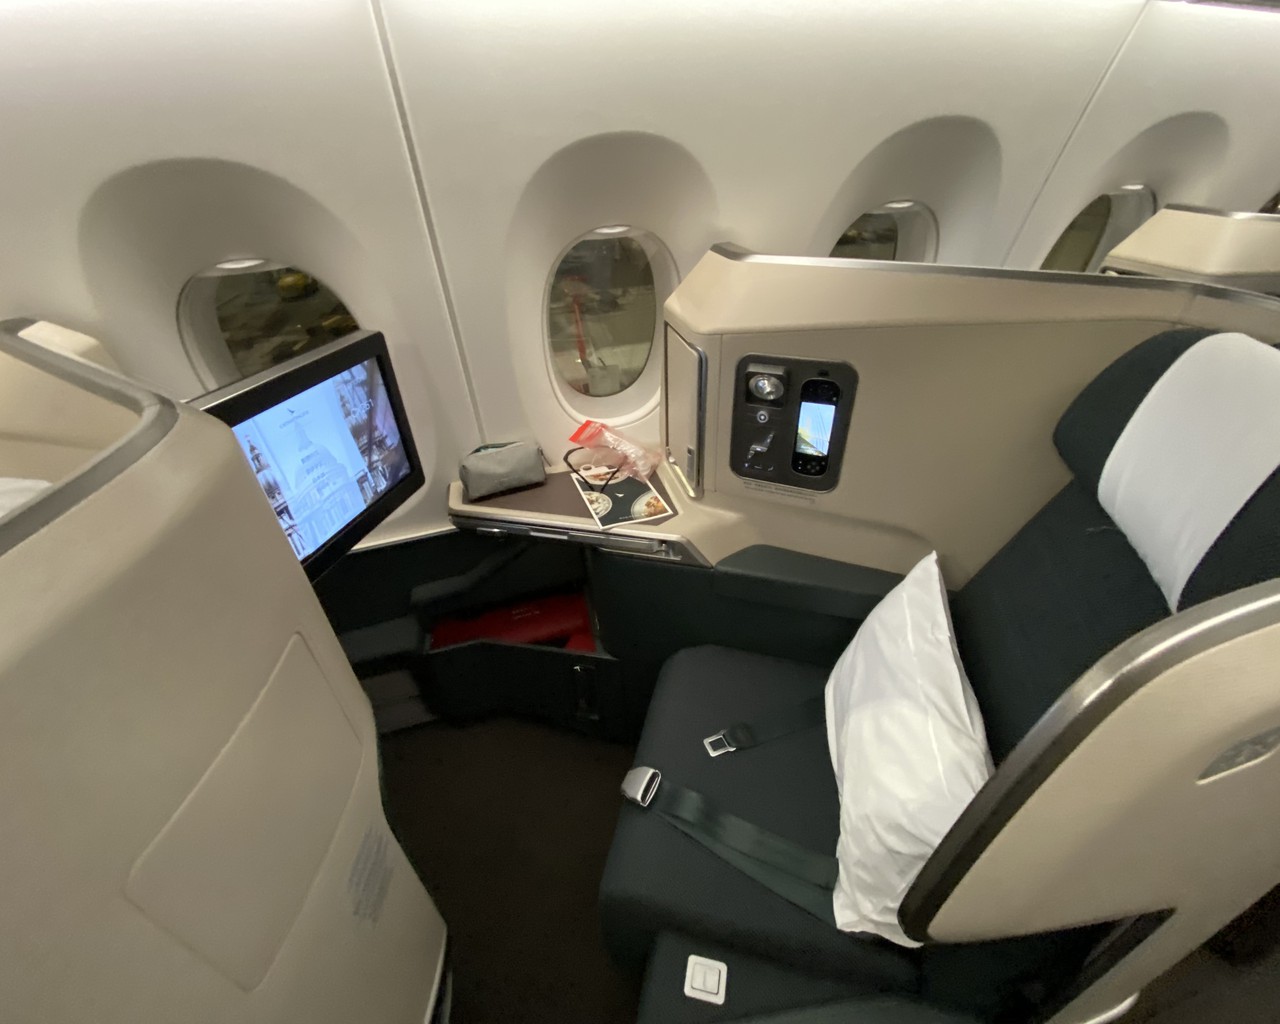 Review of Cathay Pacific flight from Hong Kong to London in Business